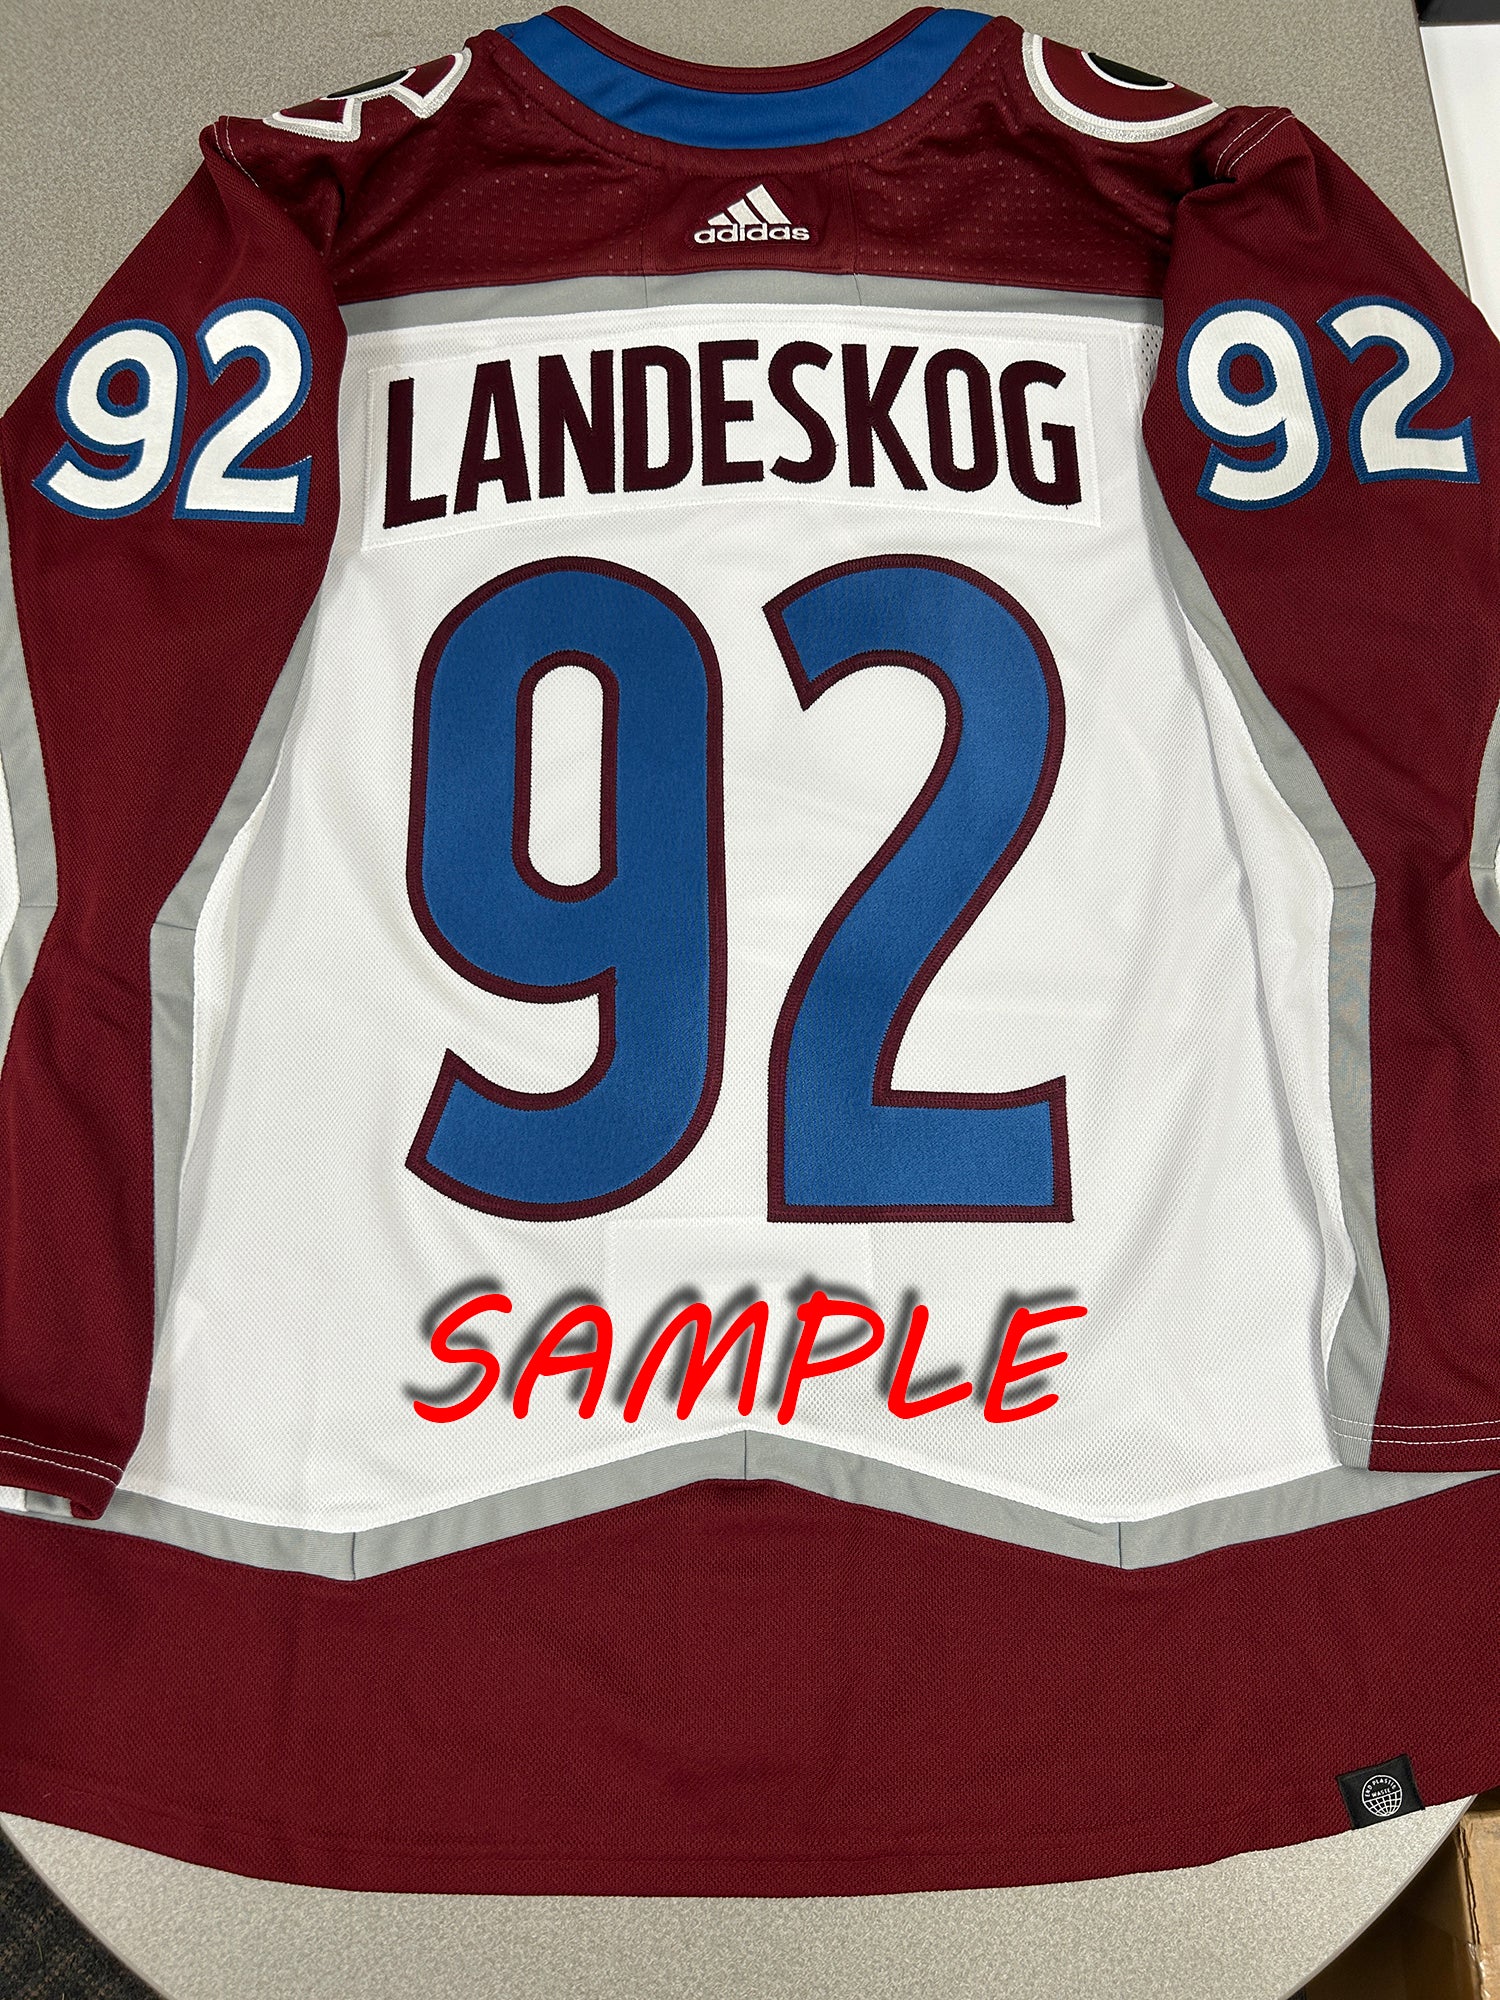 Colorado Avalanche Game Used NHL Jerseys for sale